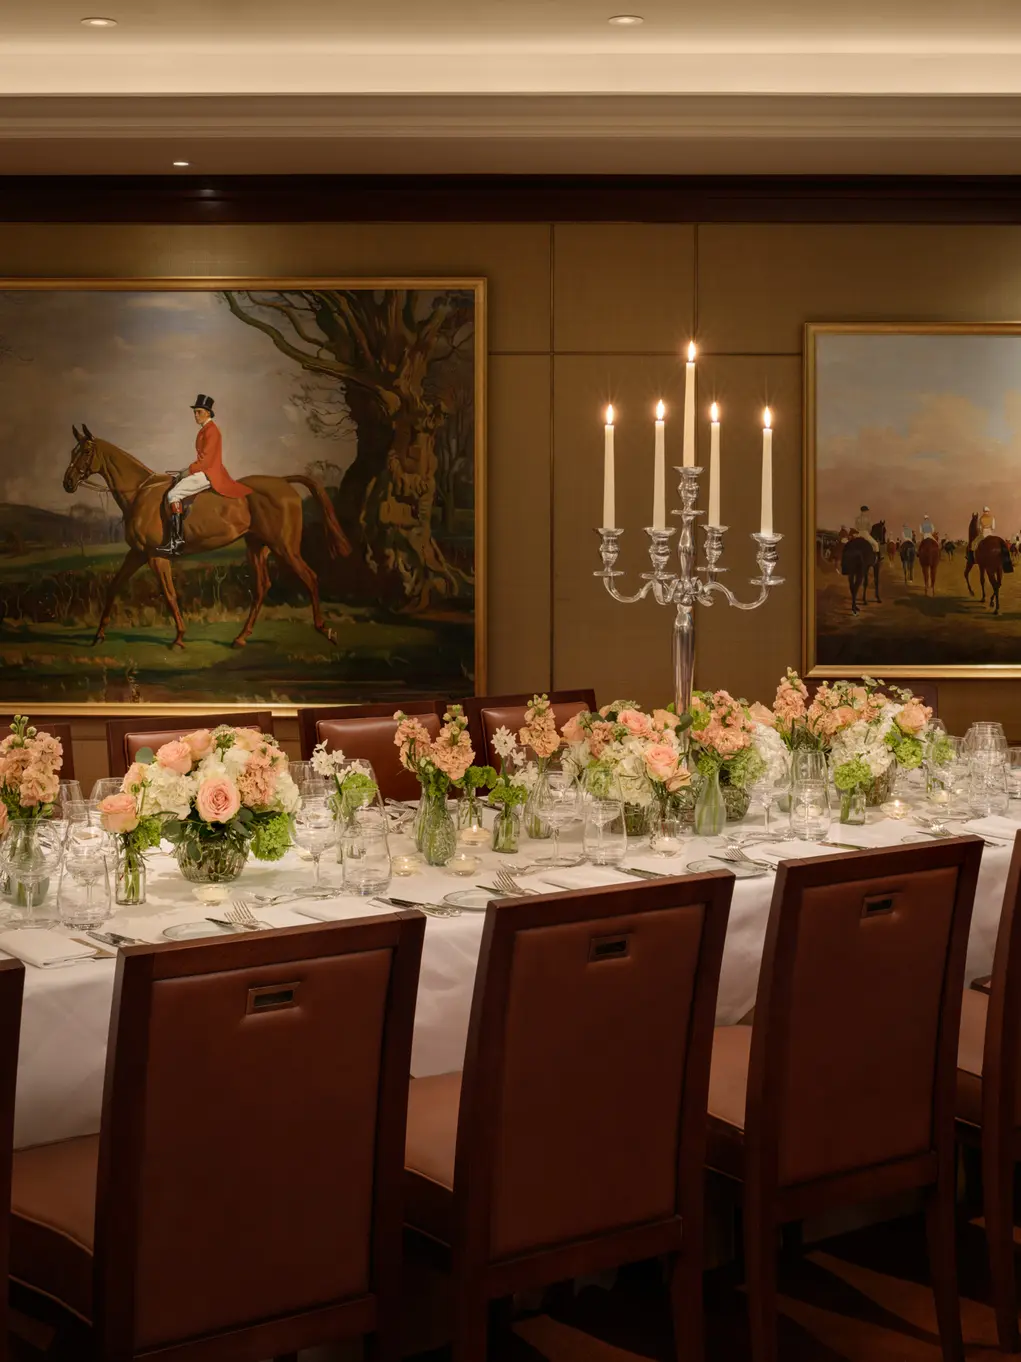 A room with two pictures of horses and a dining table decorated for a wedding with candles and flowers